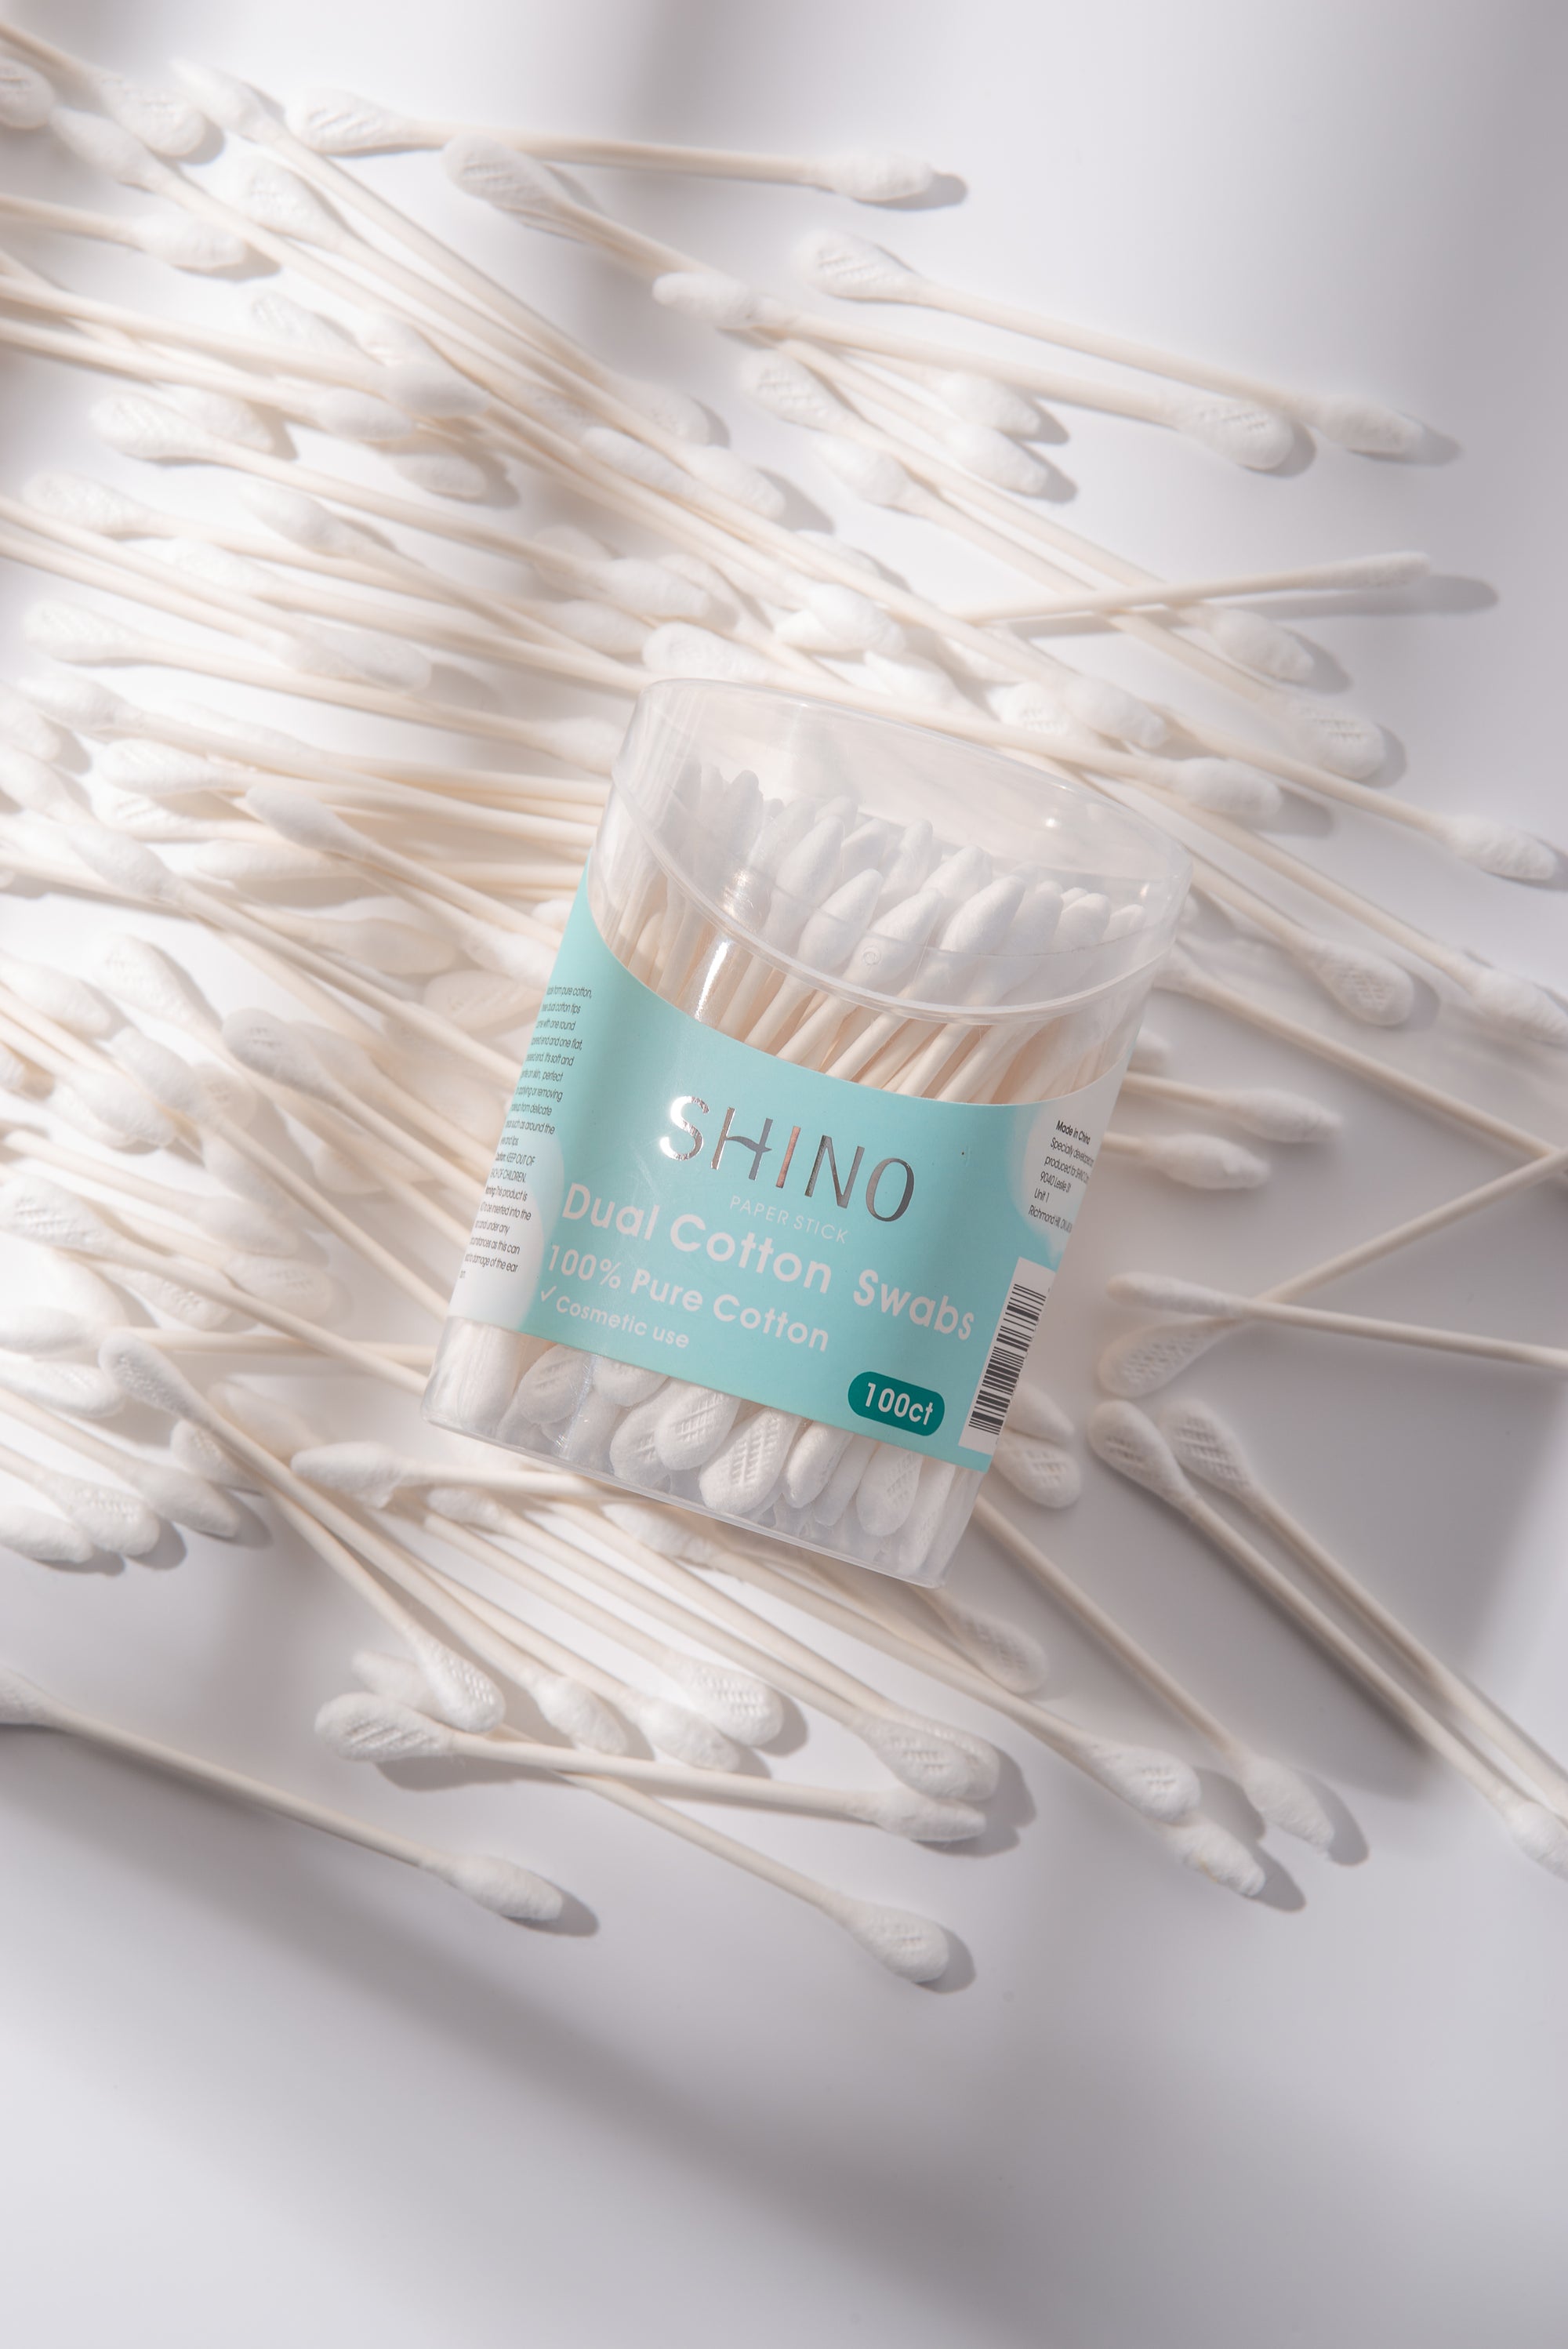 Dual Cotton Swabs, Cosmetic Use